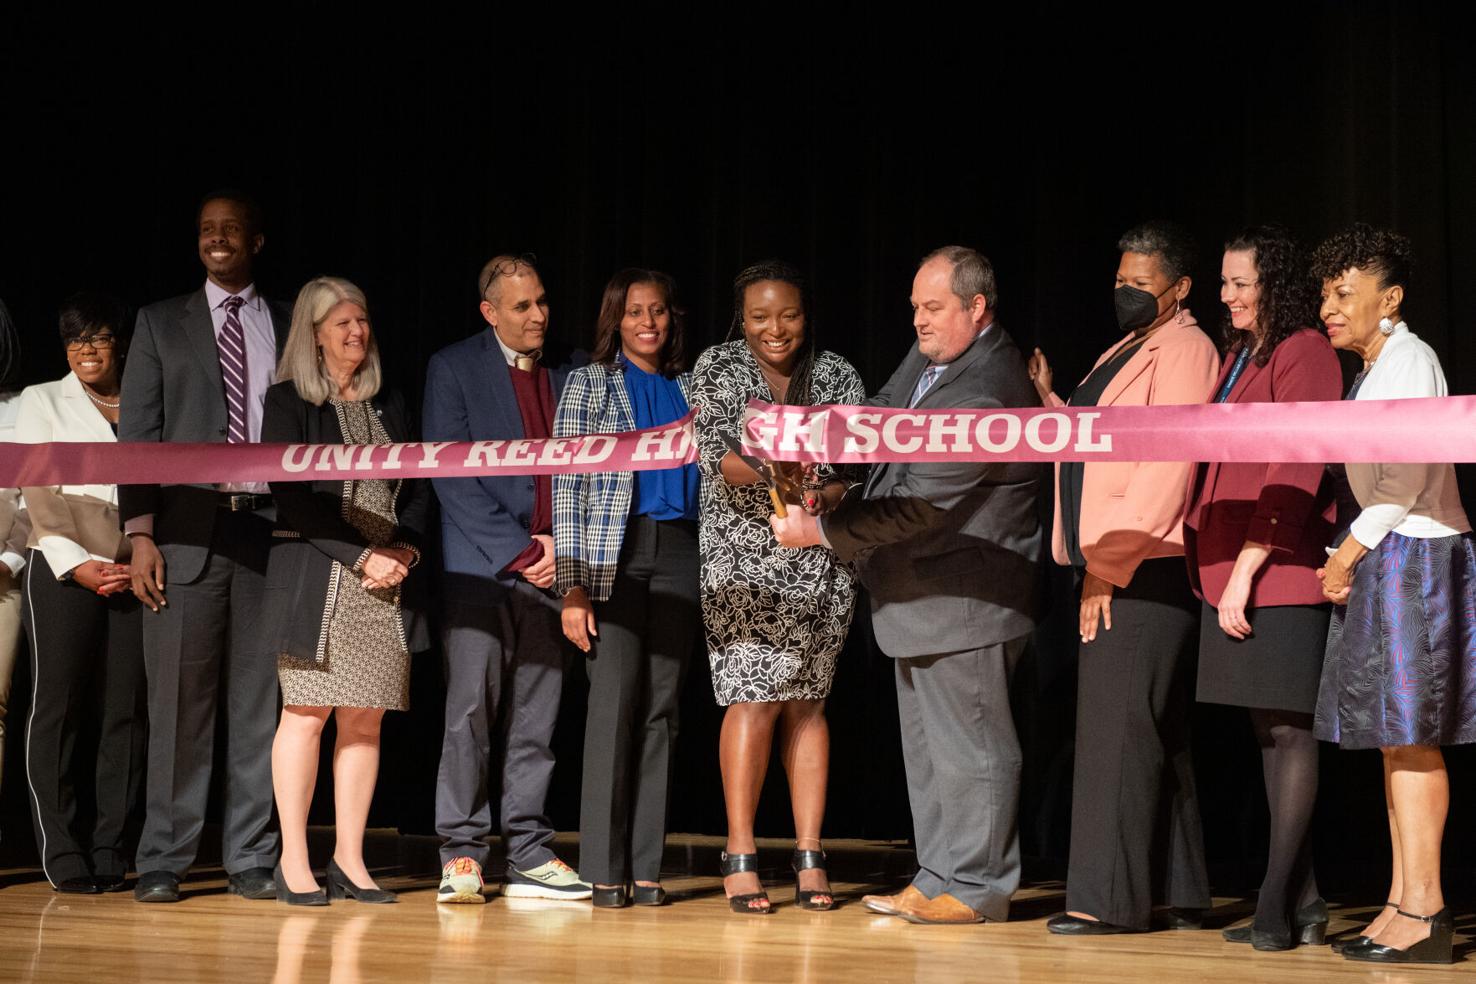 Unity Reed High School celebrates its new name, new look News